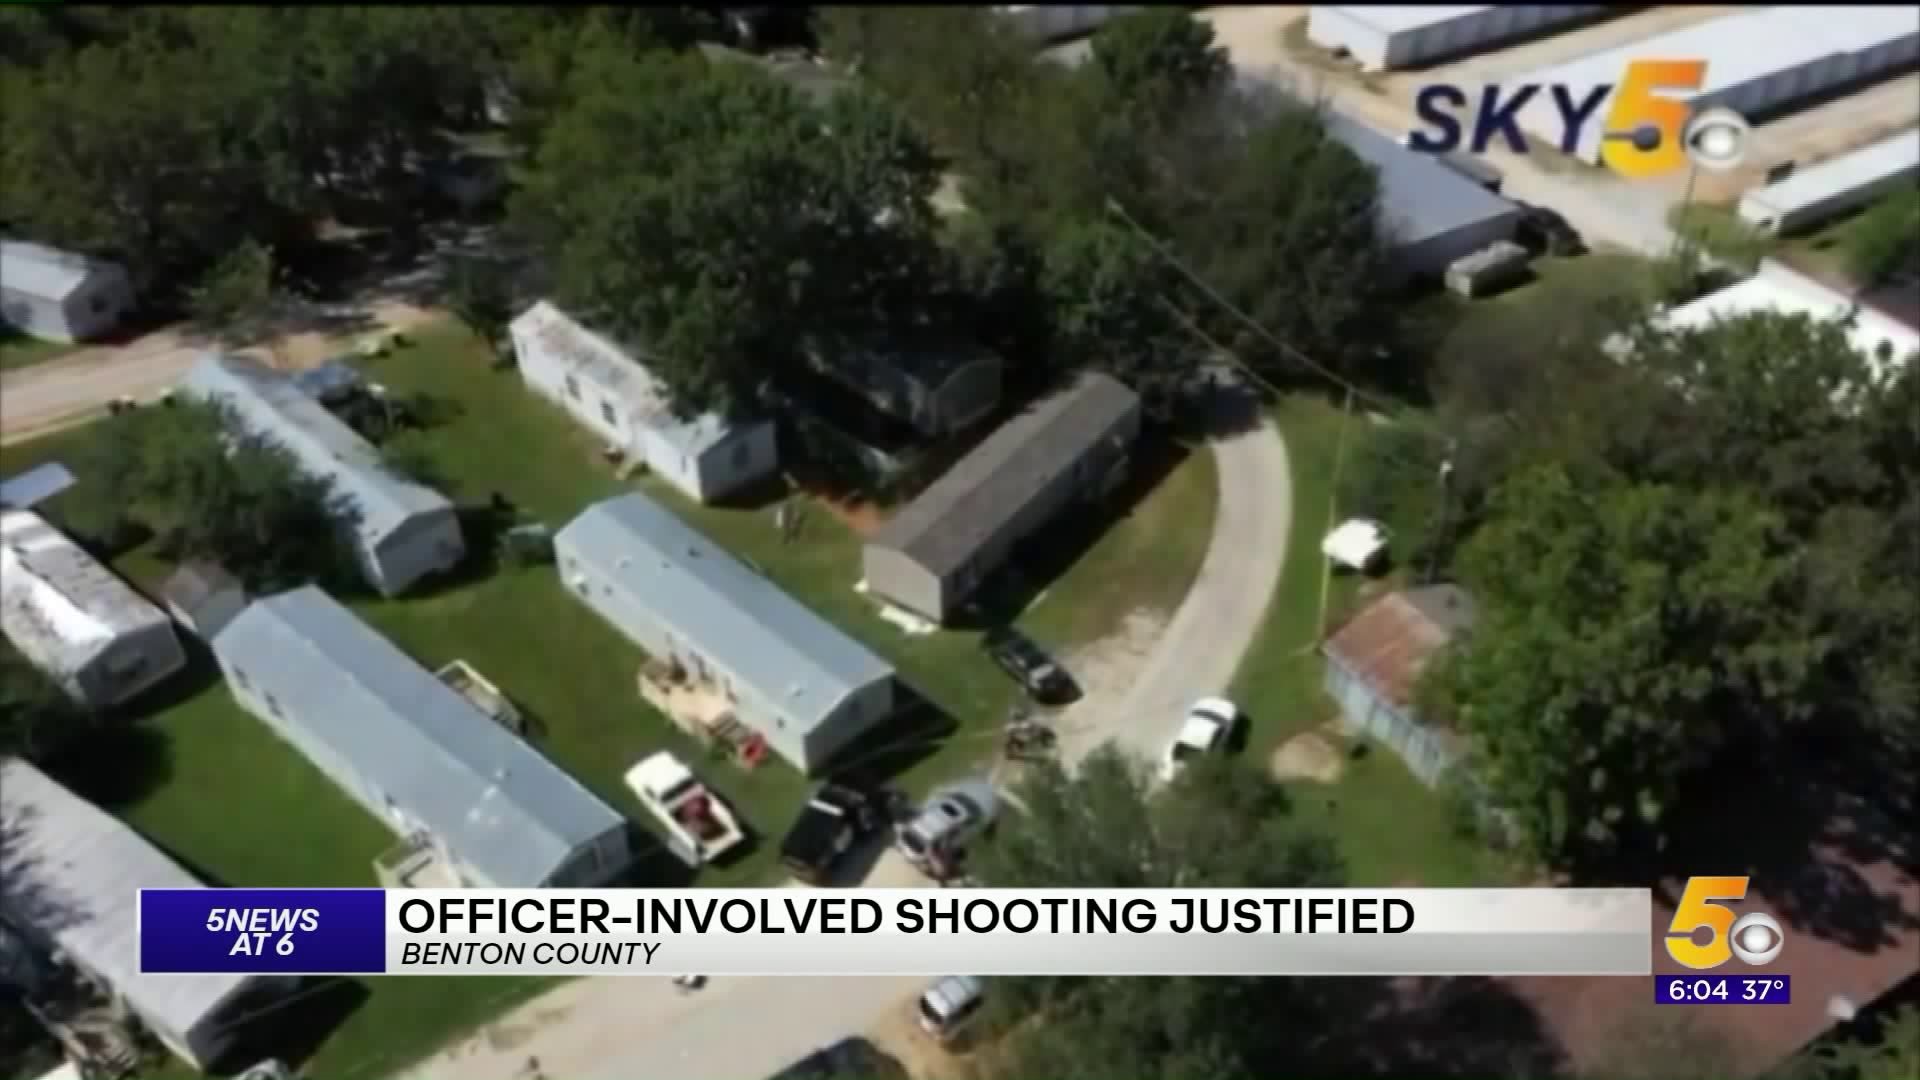 Benton County Officer-Involved Shooting Justified